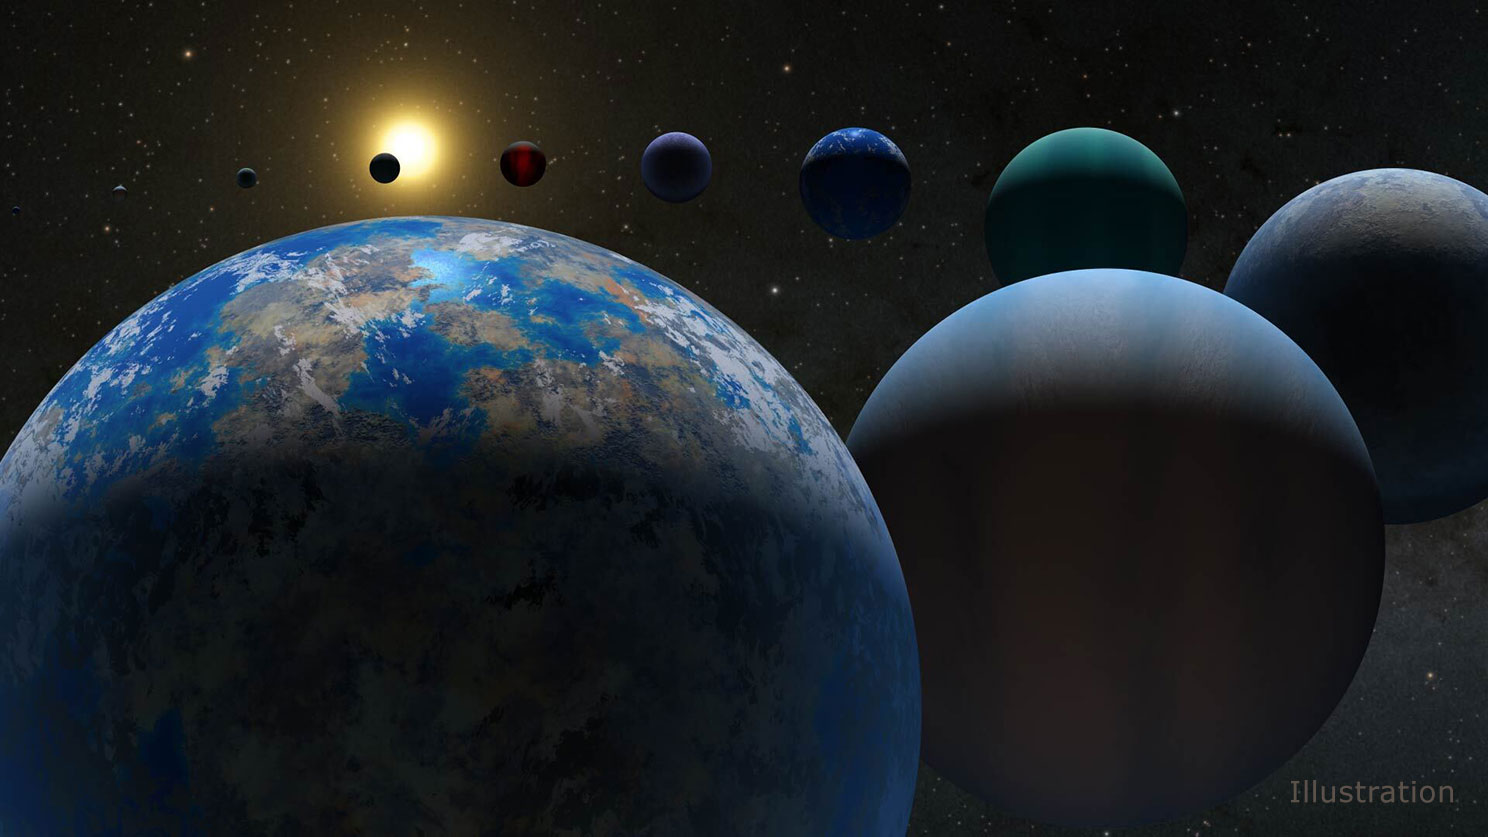 an artists illustration of ten different versions of exoplanets arranged in a circular patternfound in the nasa exoplanet archive